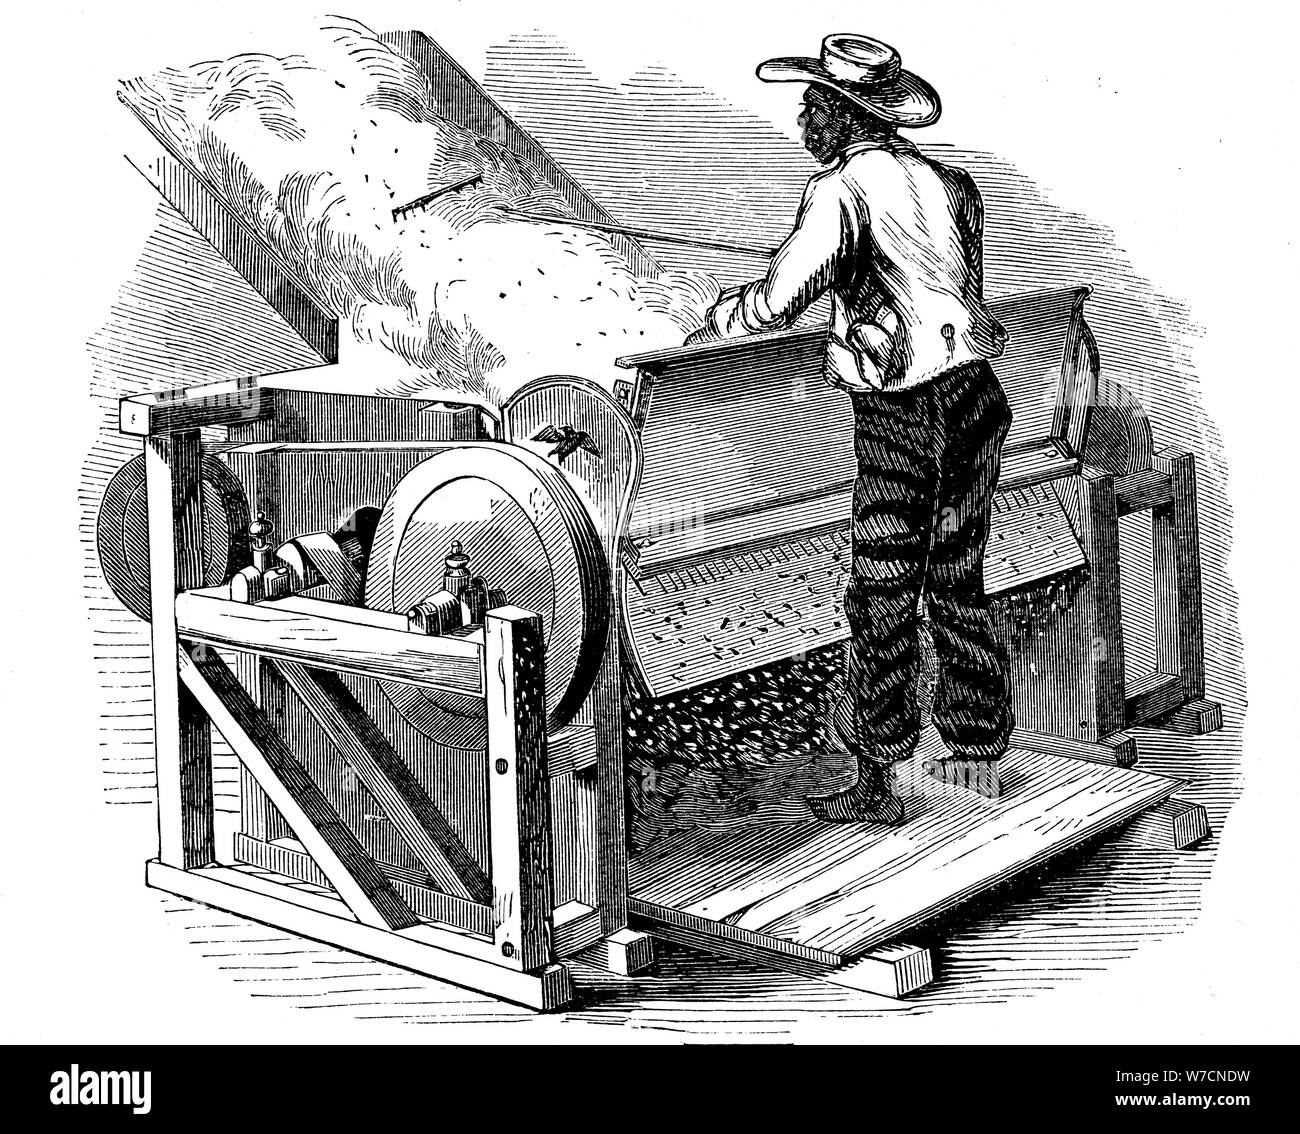 Saw gin for cleaning cotton being operated by barefoot black labourer, southern USA, 1865. Artist: Unknown Stock Photo